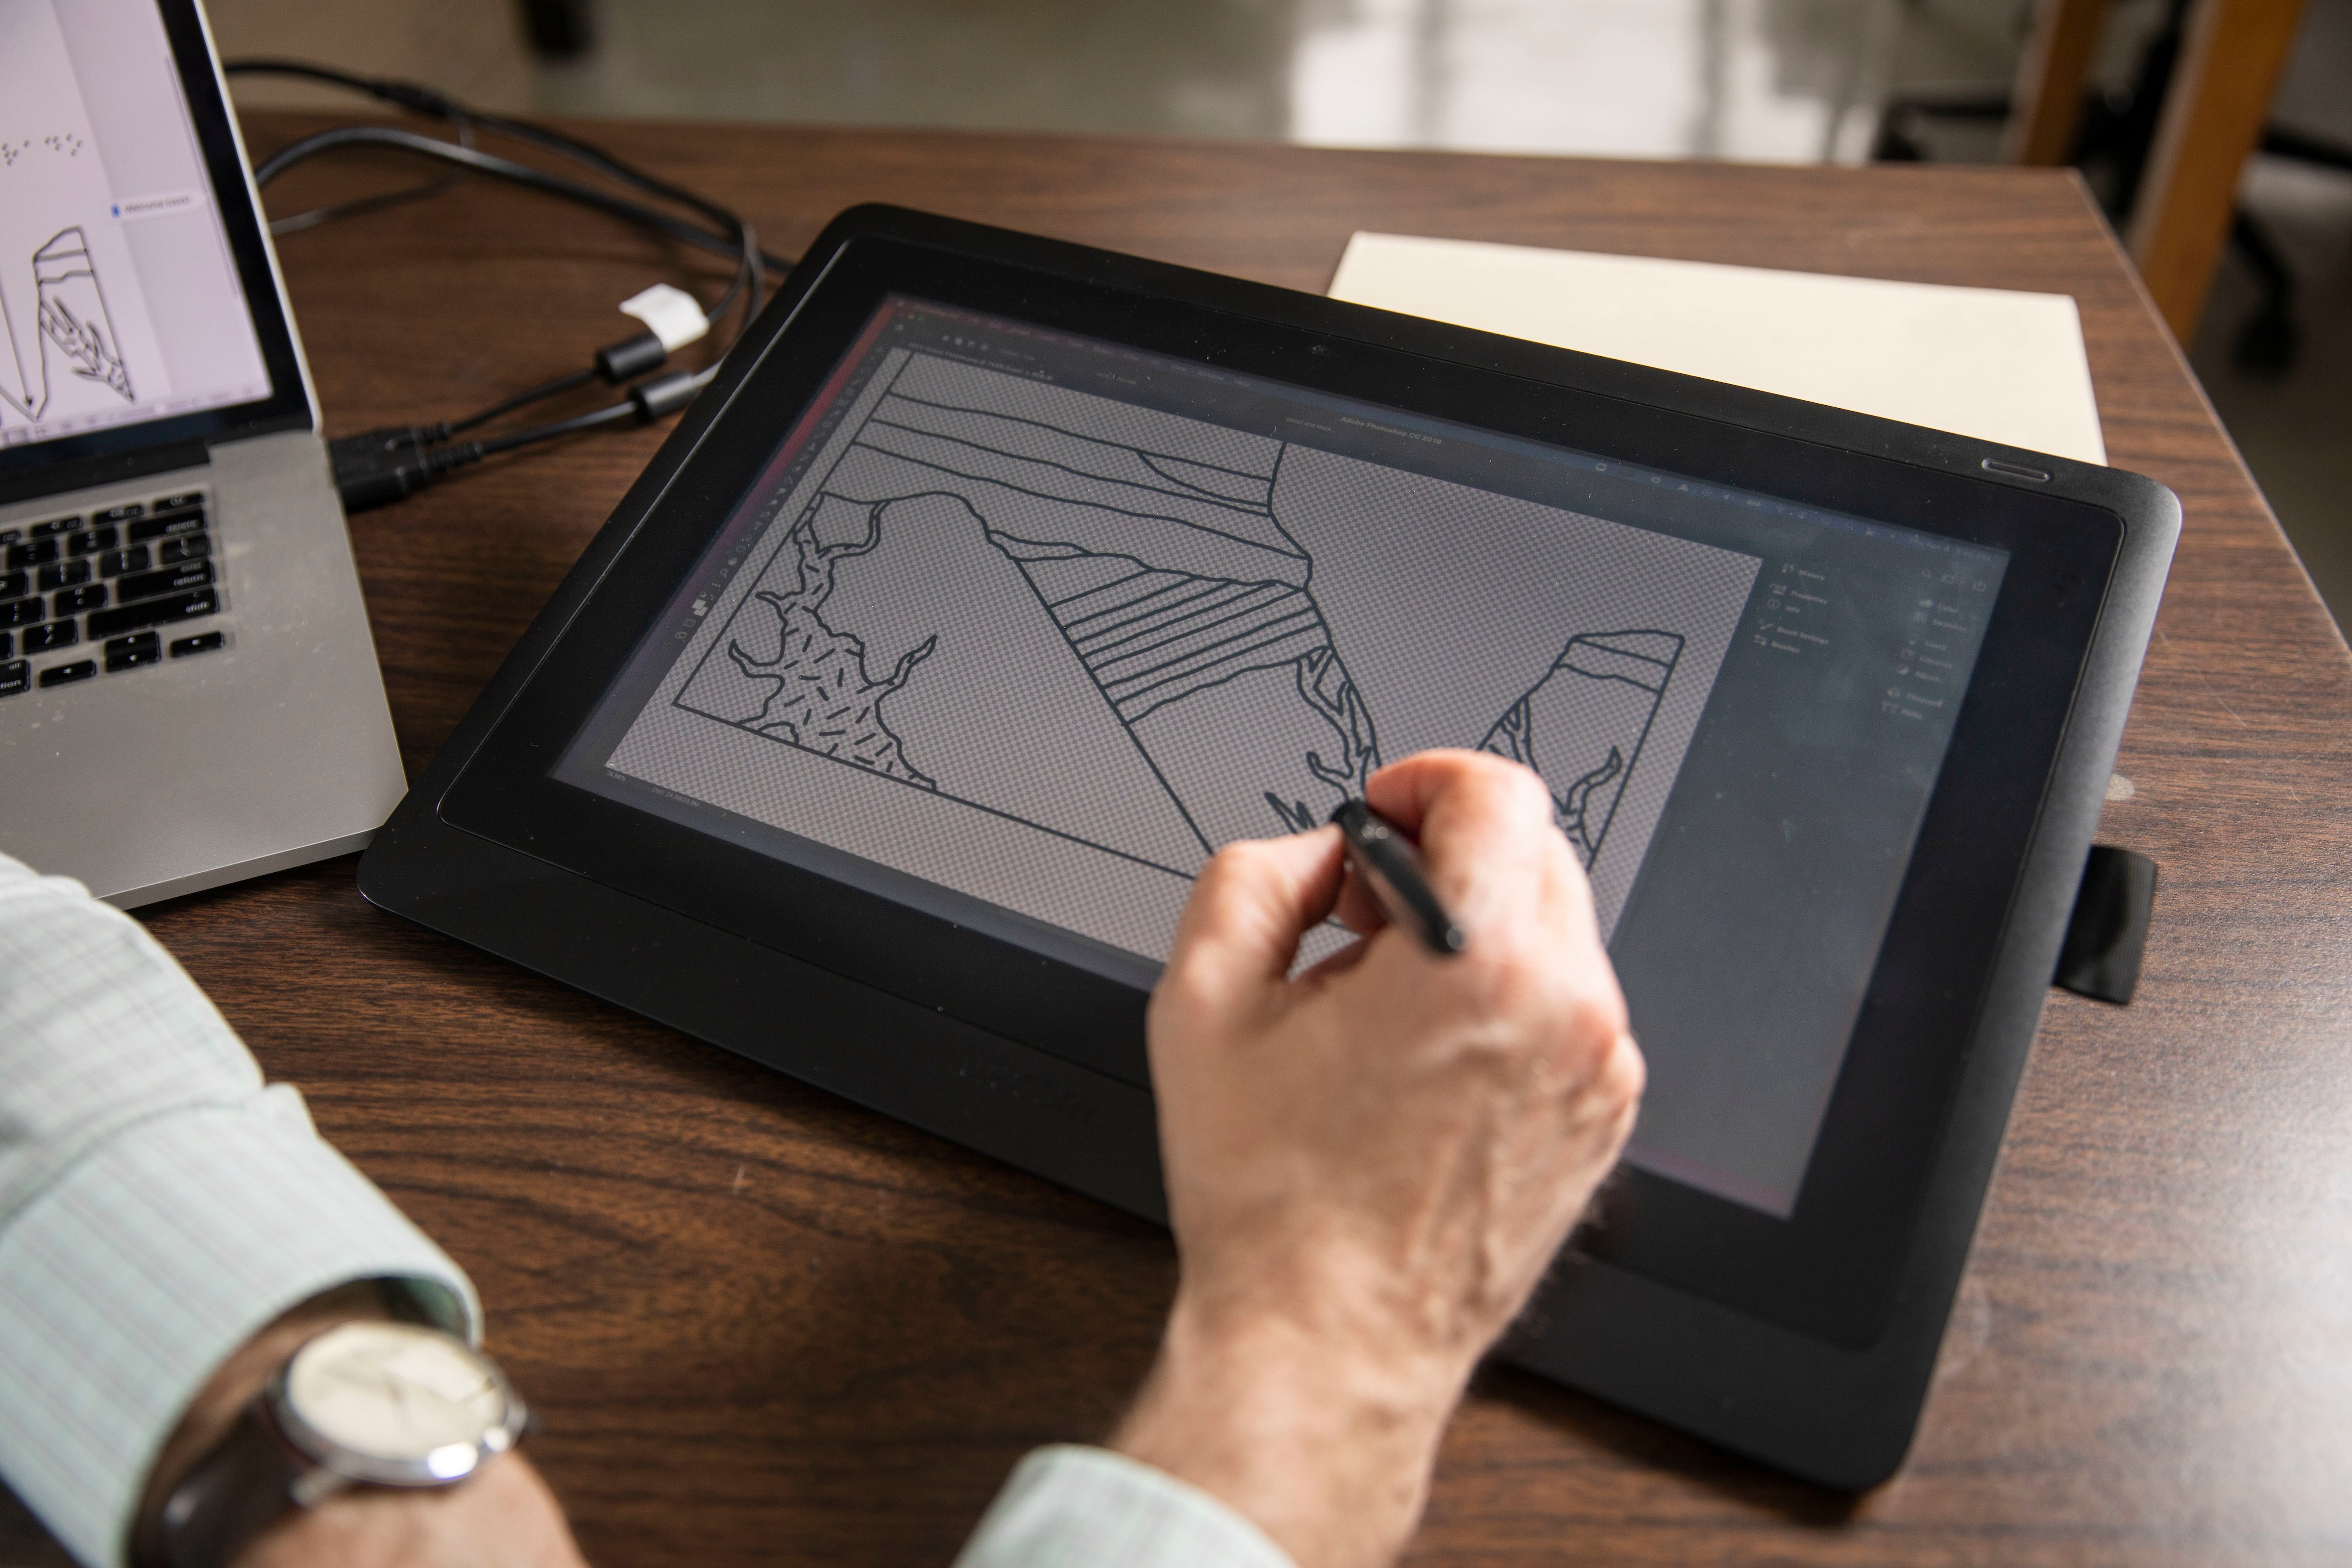 Image: Kent Ratajeski drawing the template for a textile graphic on a tablet.